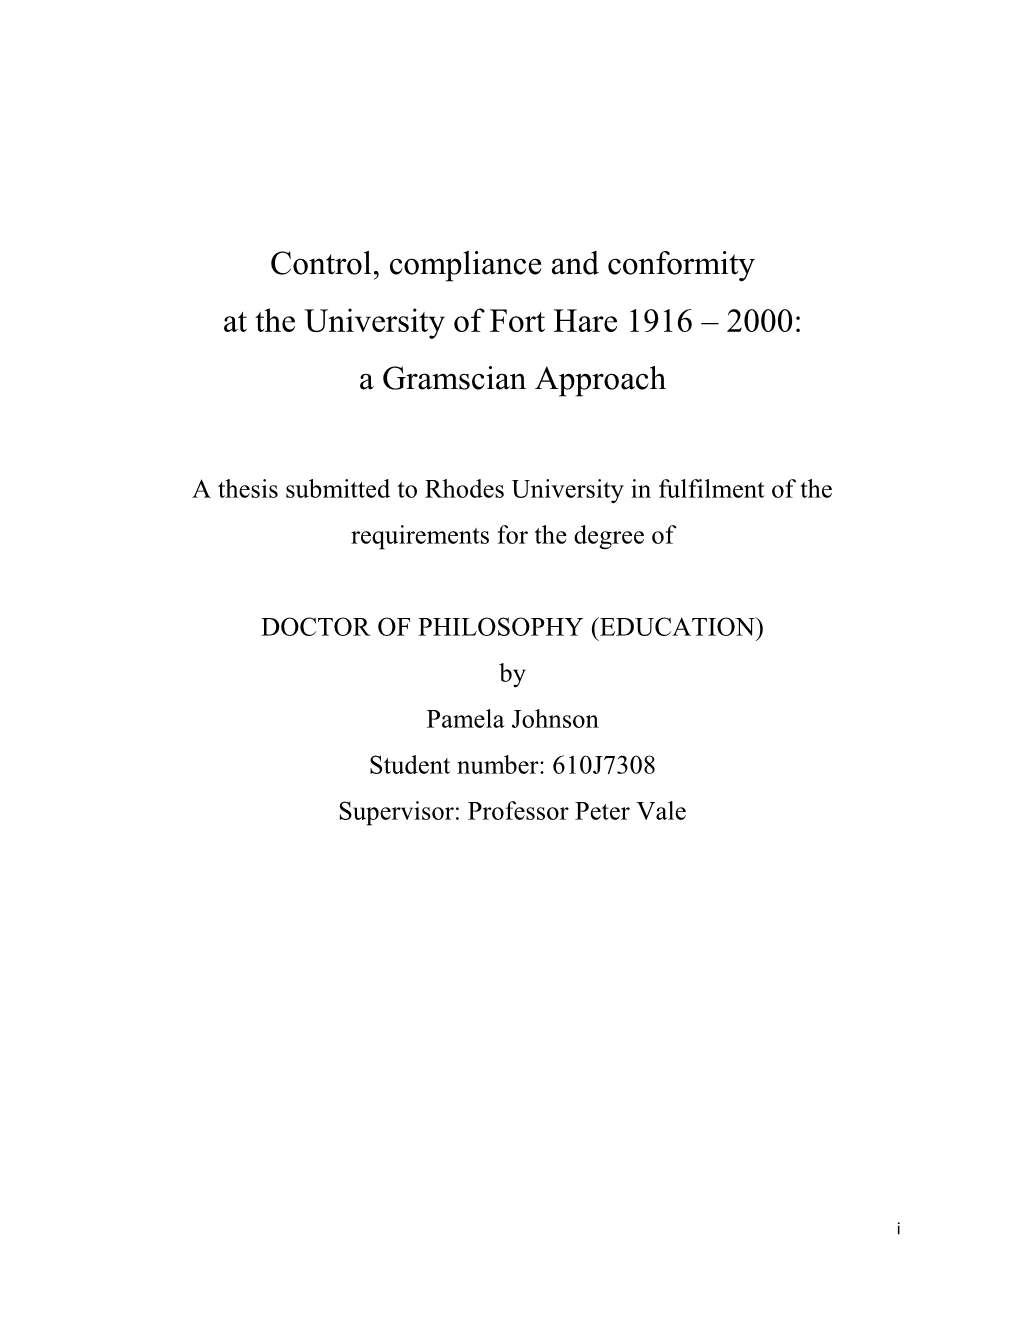 Control, Compliance and Conformity at the University of Fort Hare 1916 – 2000: a Gramscian Approach